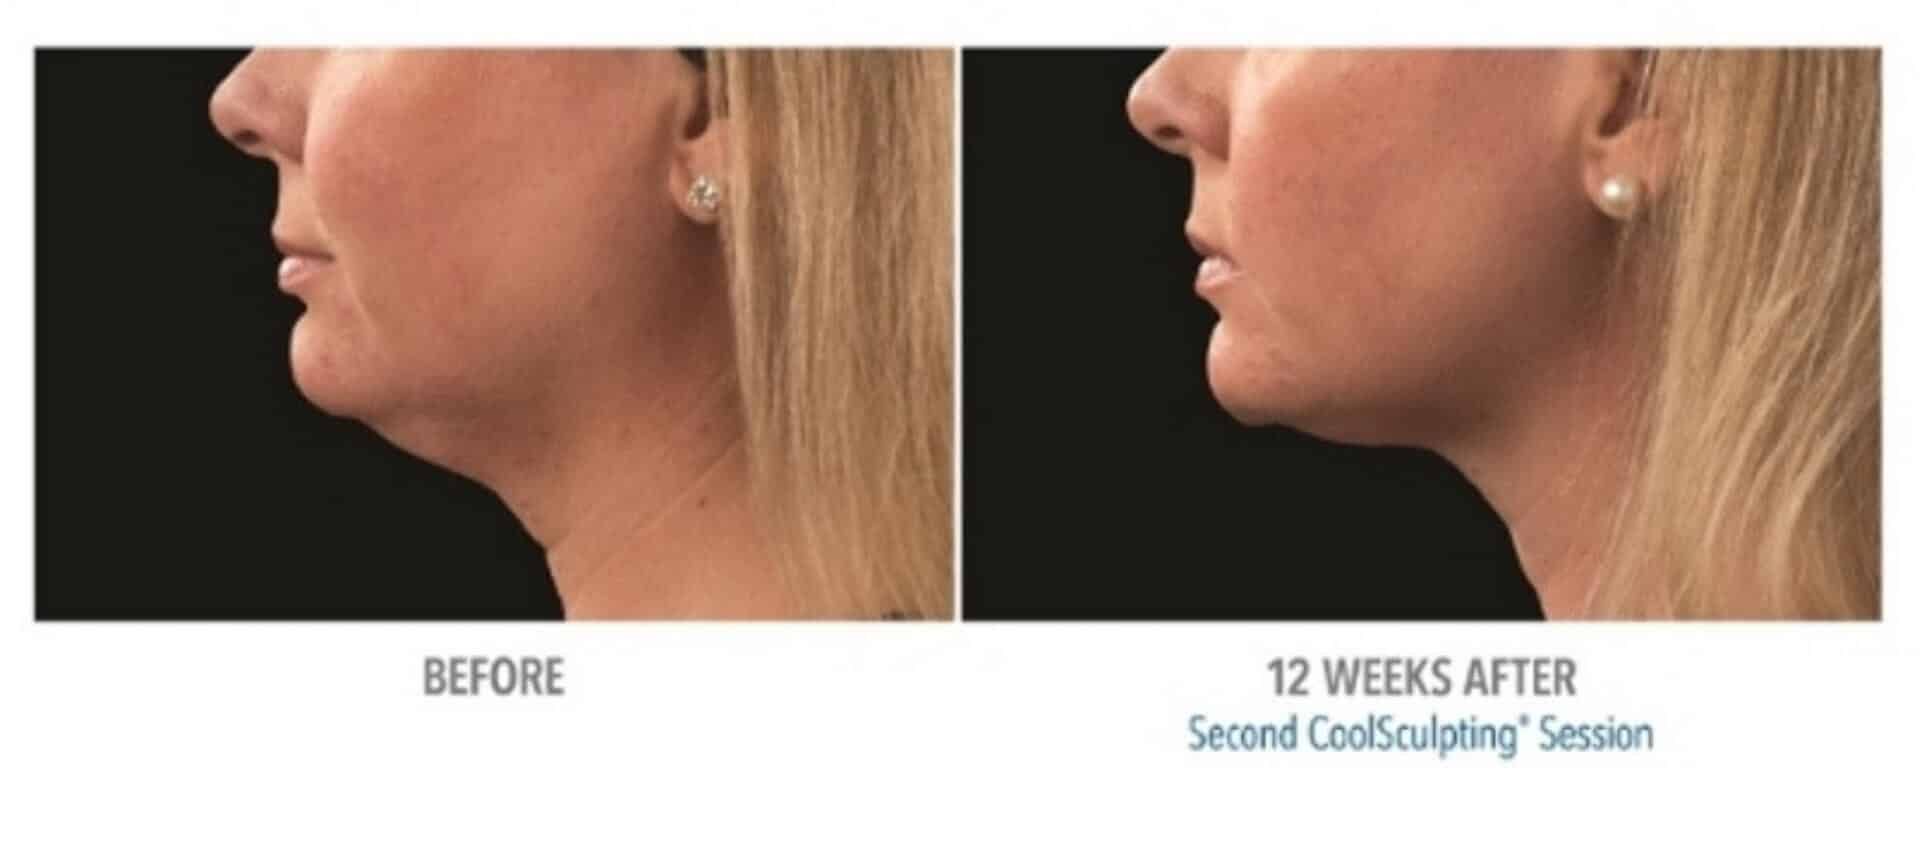 coolsculpting before after